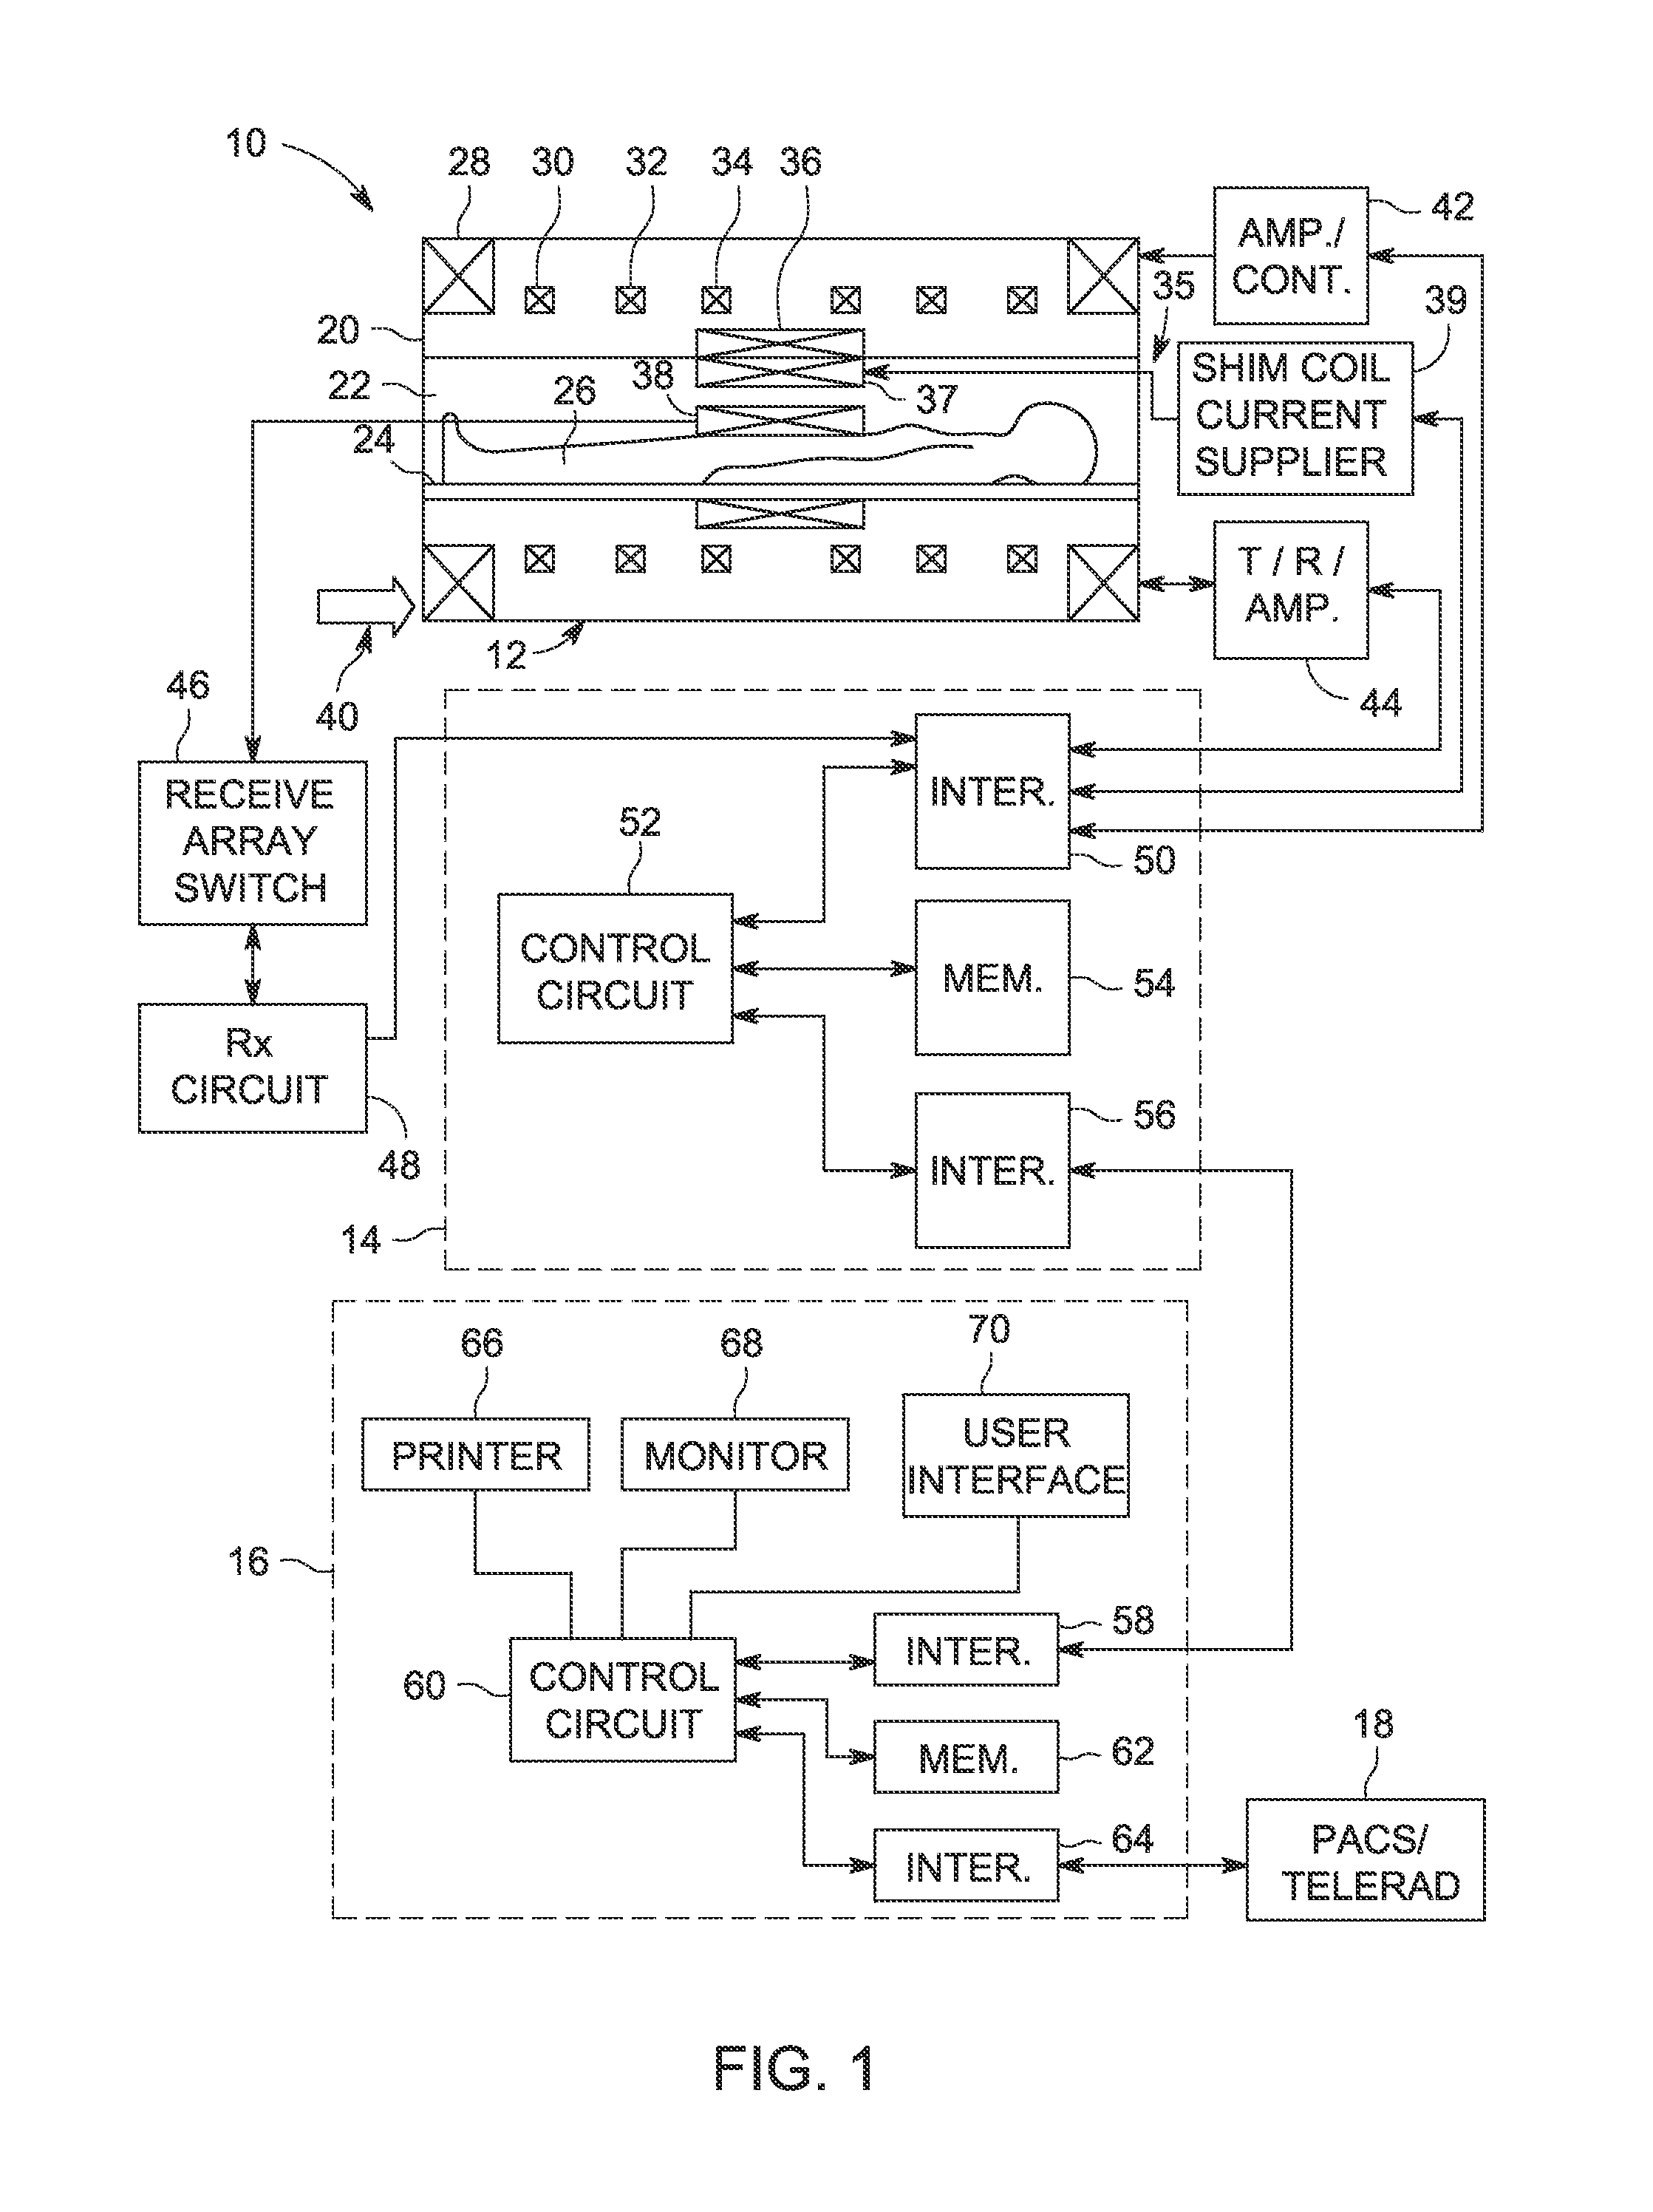 Systems and methods for shim current calculation